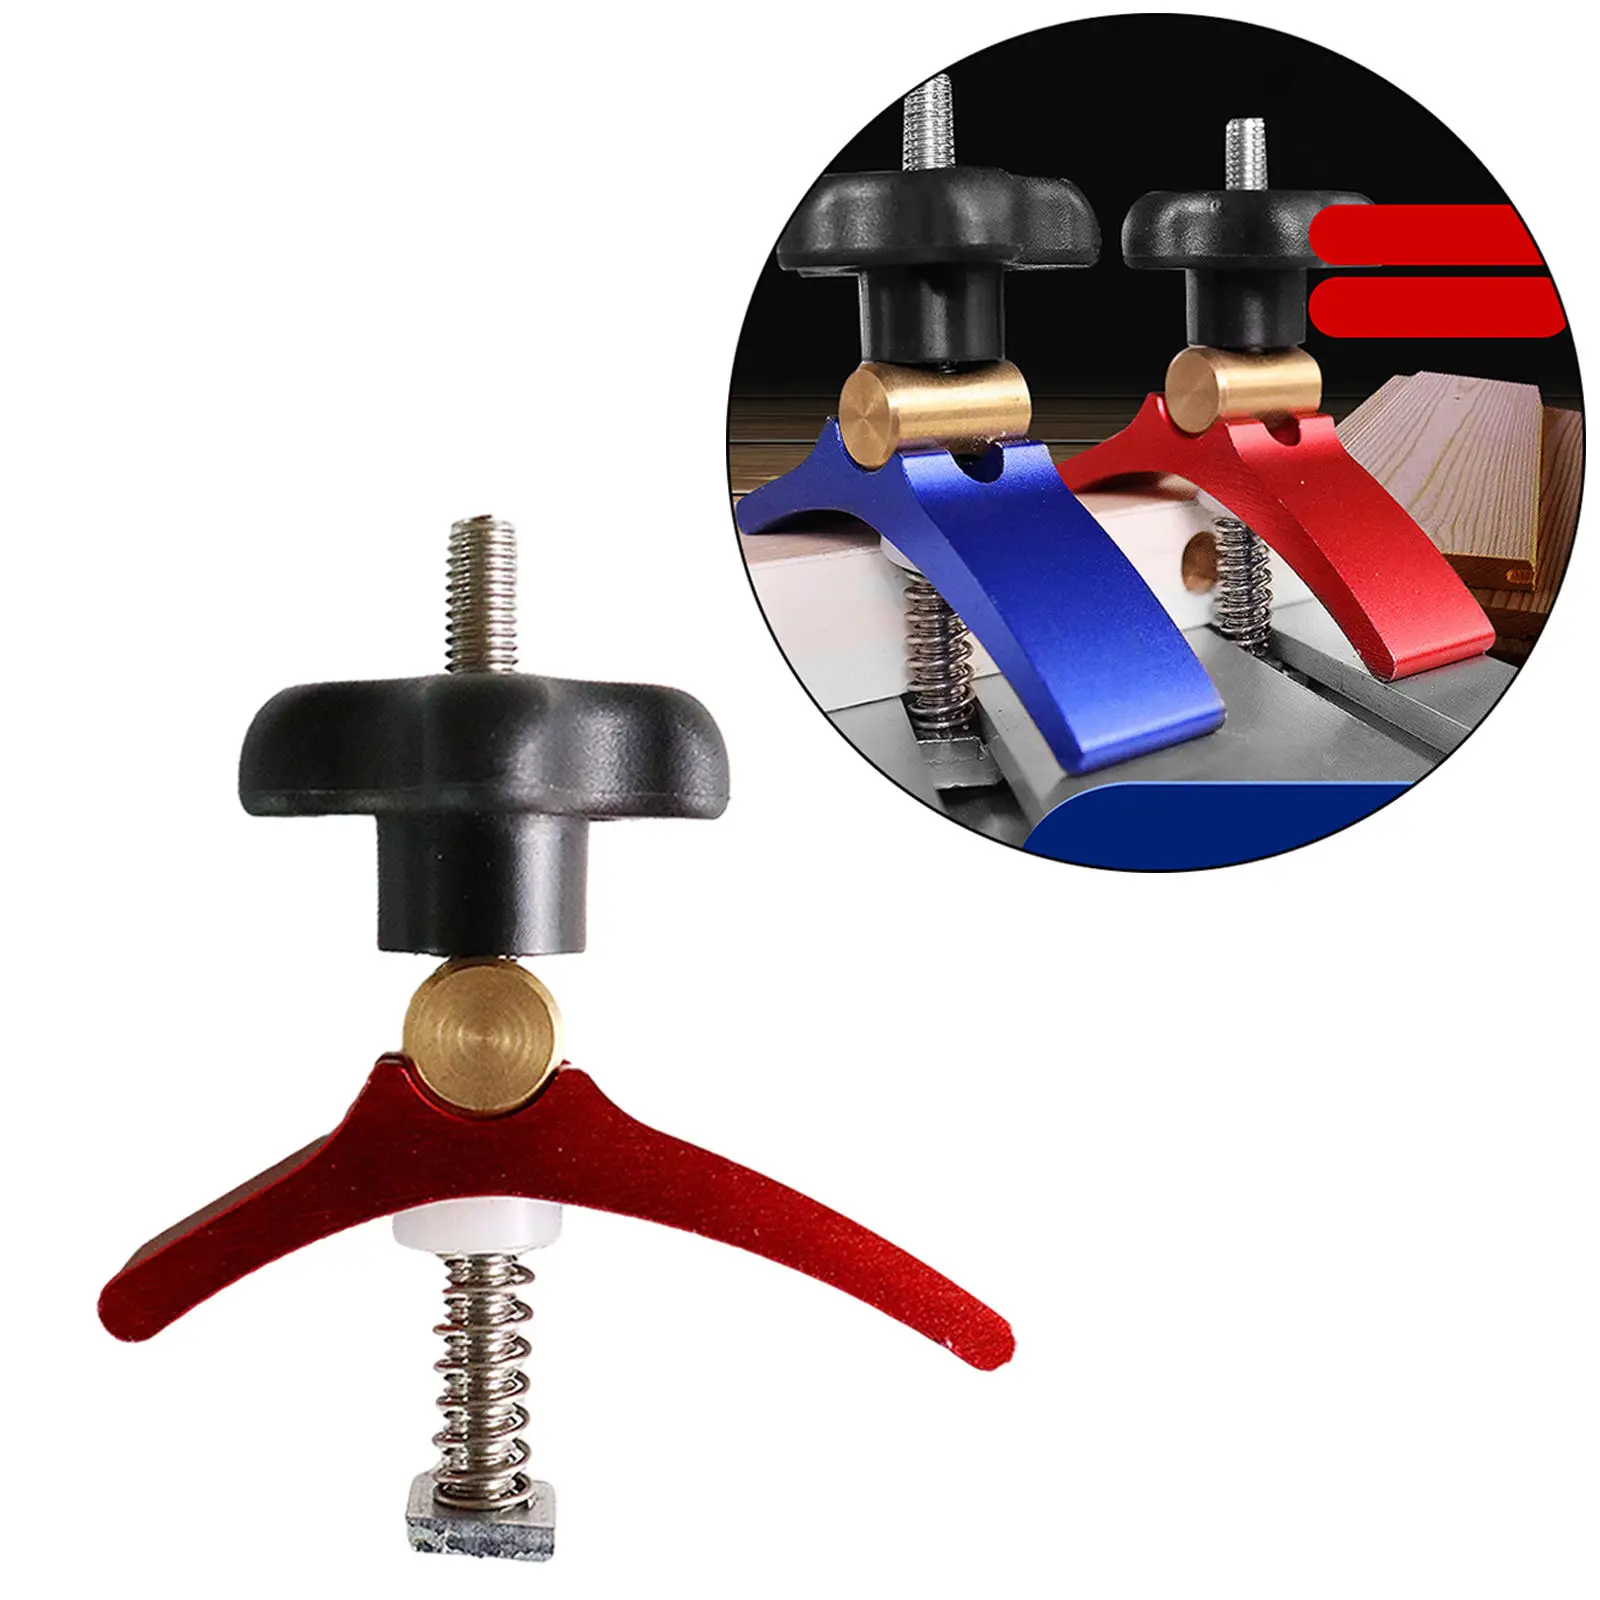 Aluminum Alloy Woodworking T-Track Mini Hold Down Clamp Kit CNC Router Machine Miter M6 Screw T Slider Kit